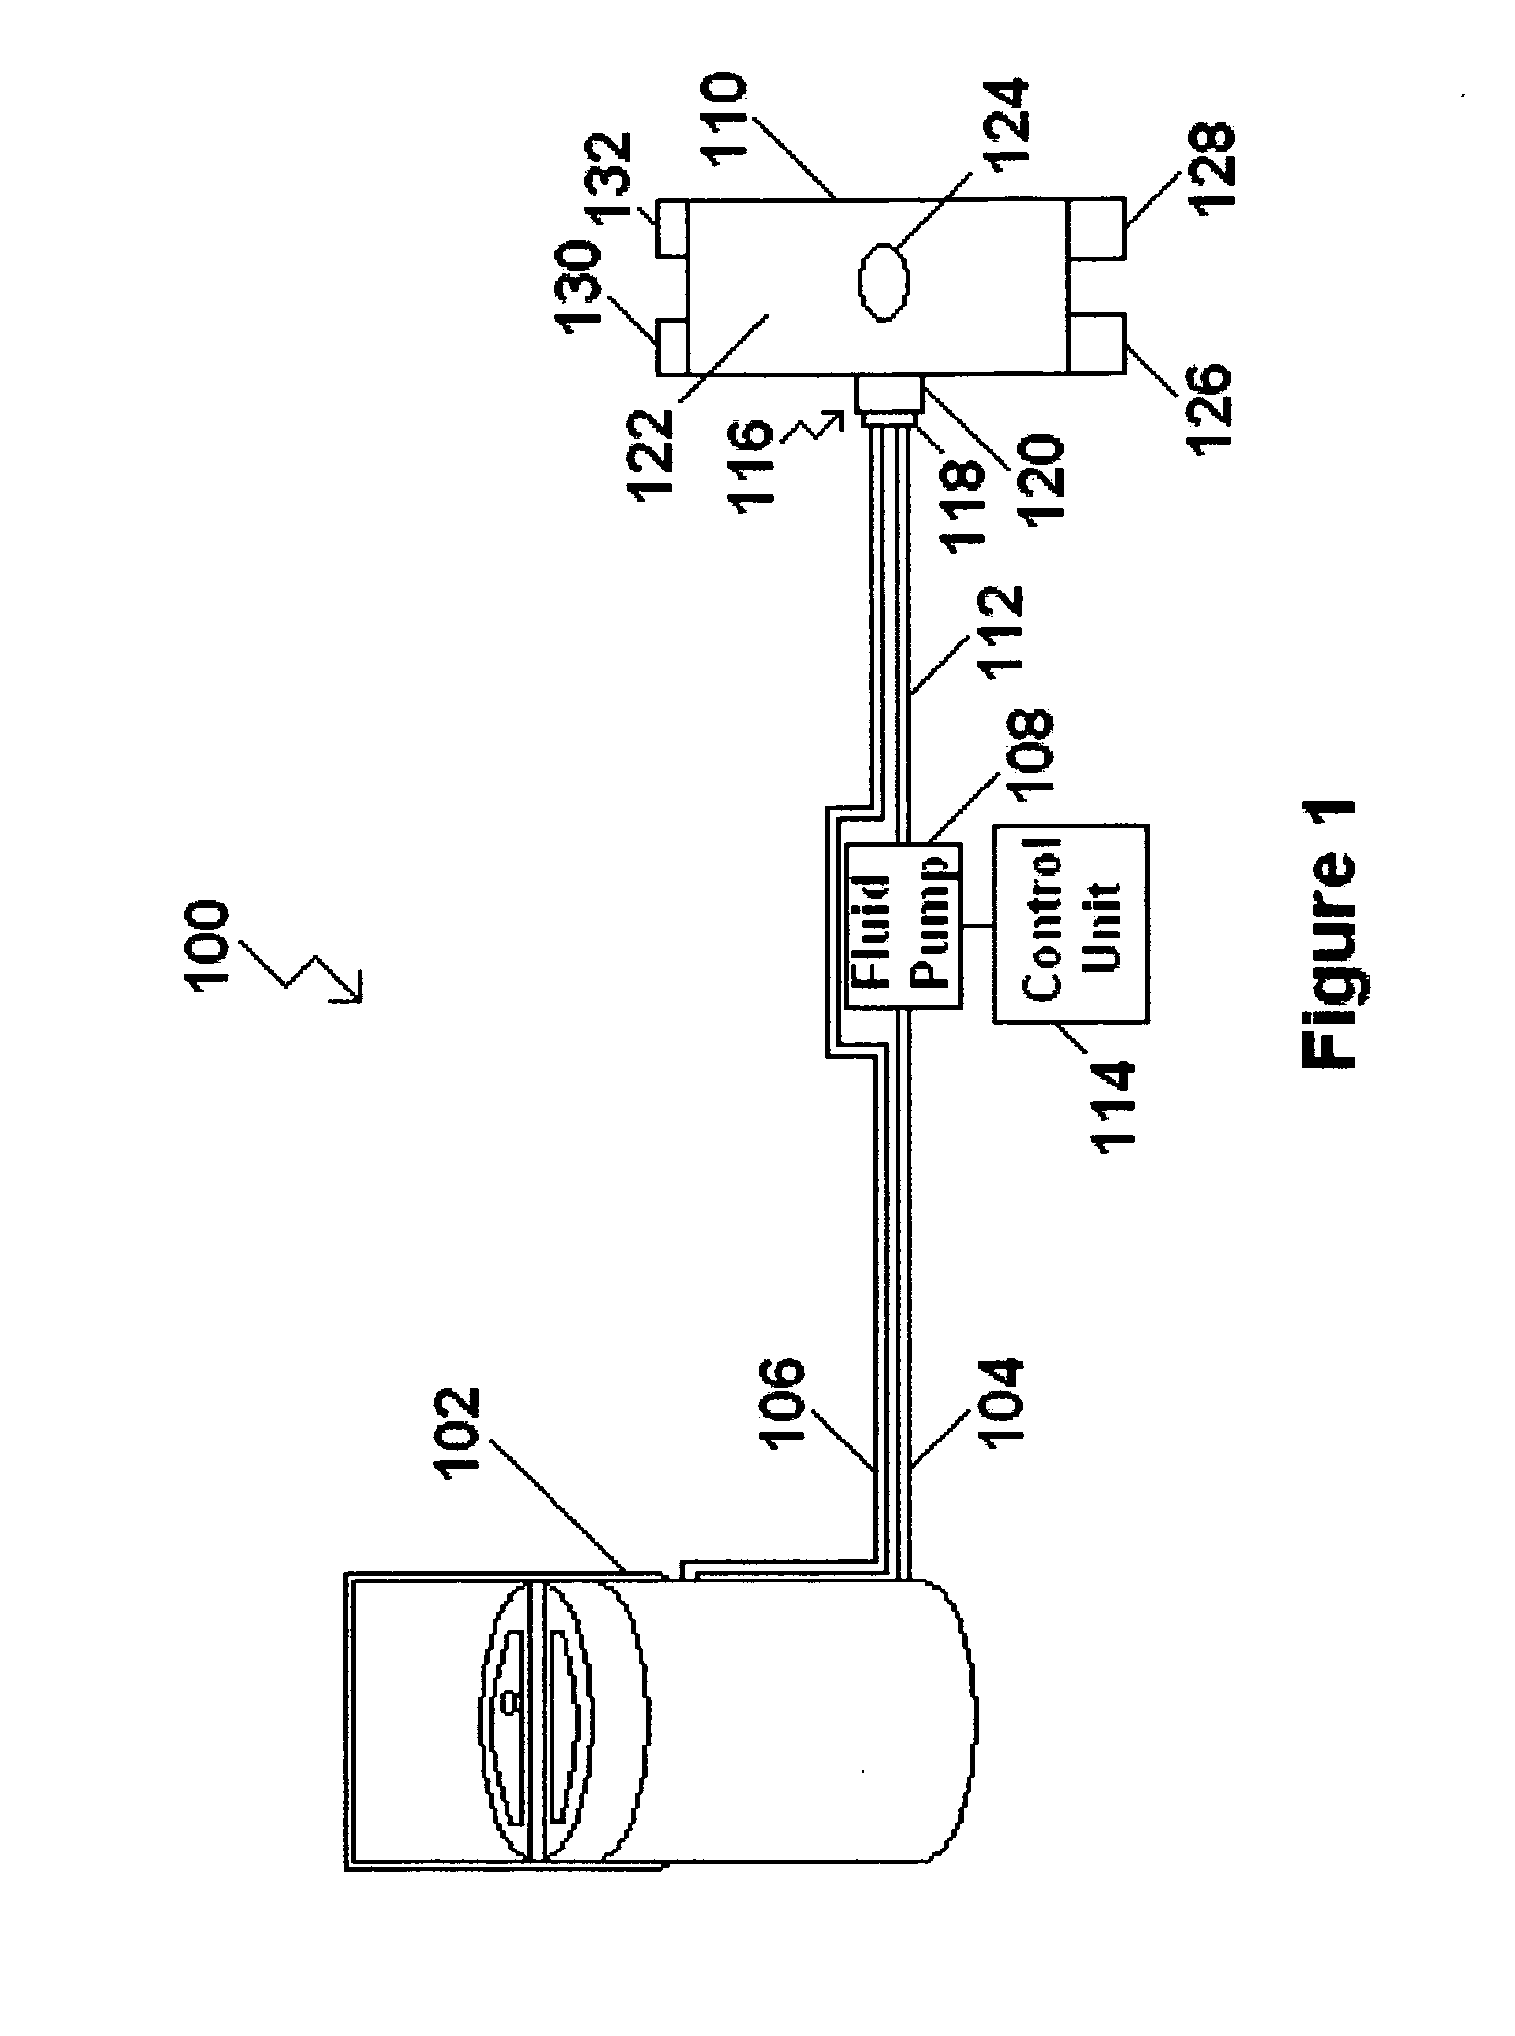 Thermal joint and bone compression system